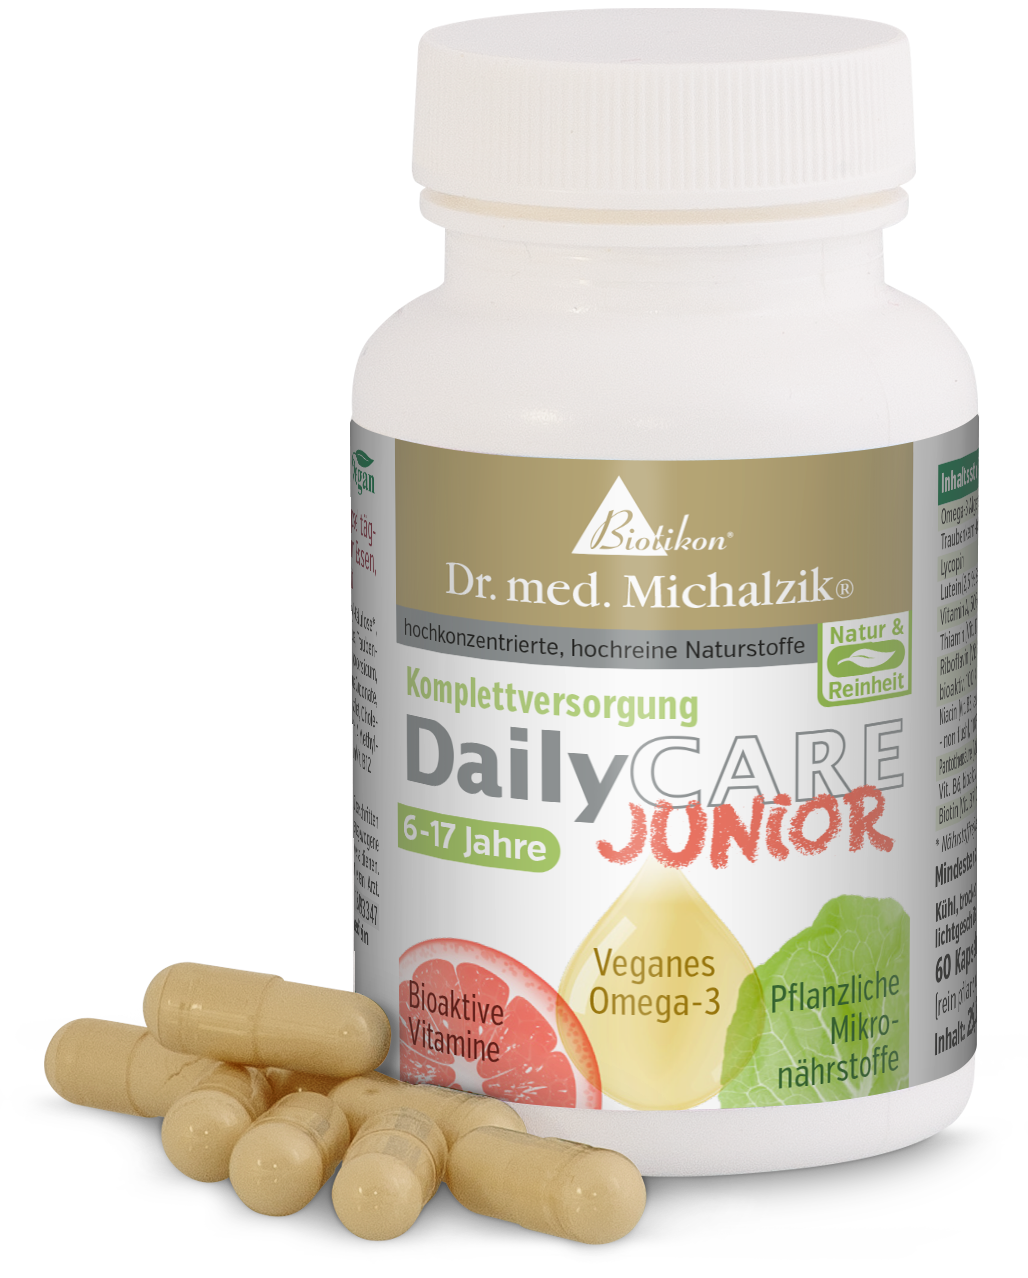 DailyCare Junior - Bioactive vitamins, omega 3 vegan + trace elements and high-quality plant substances